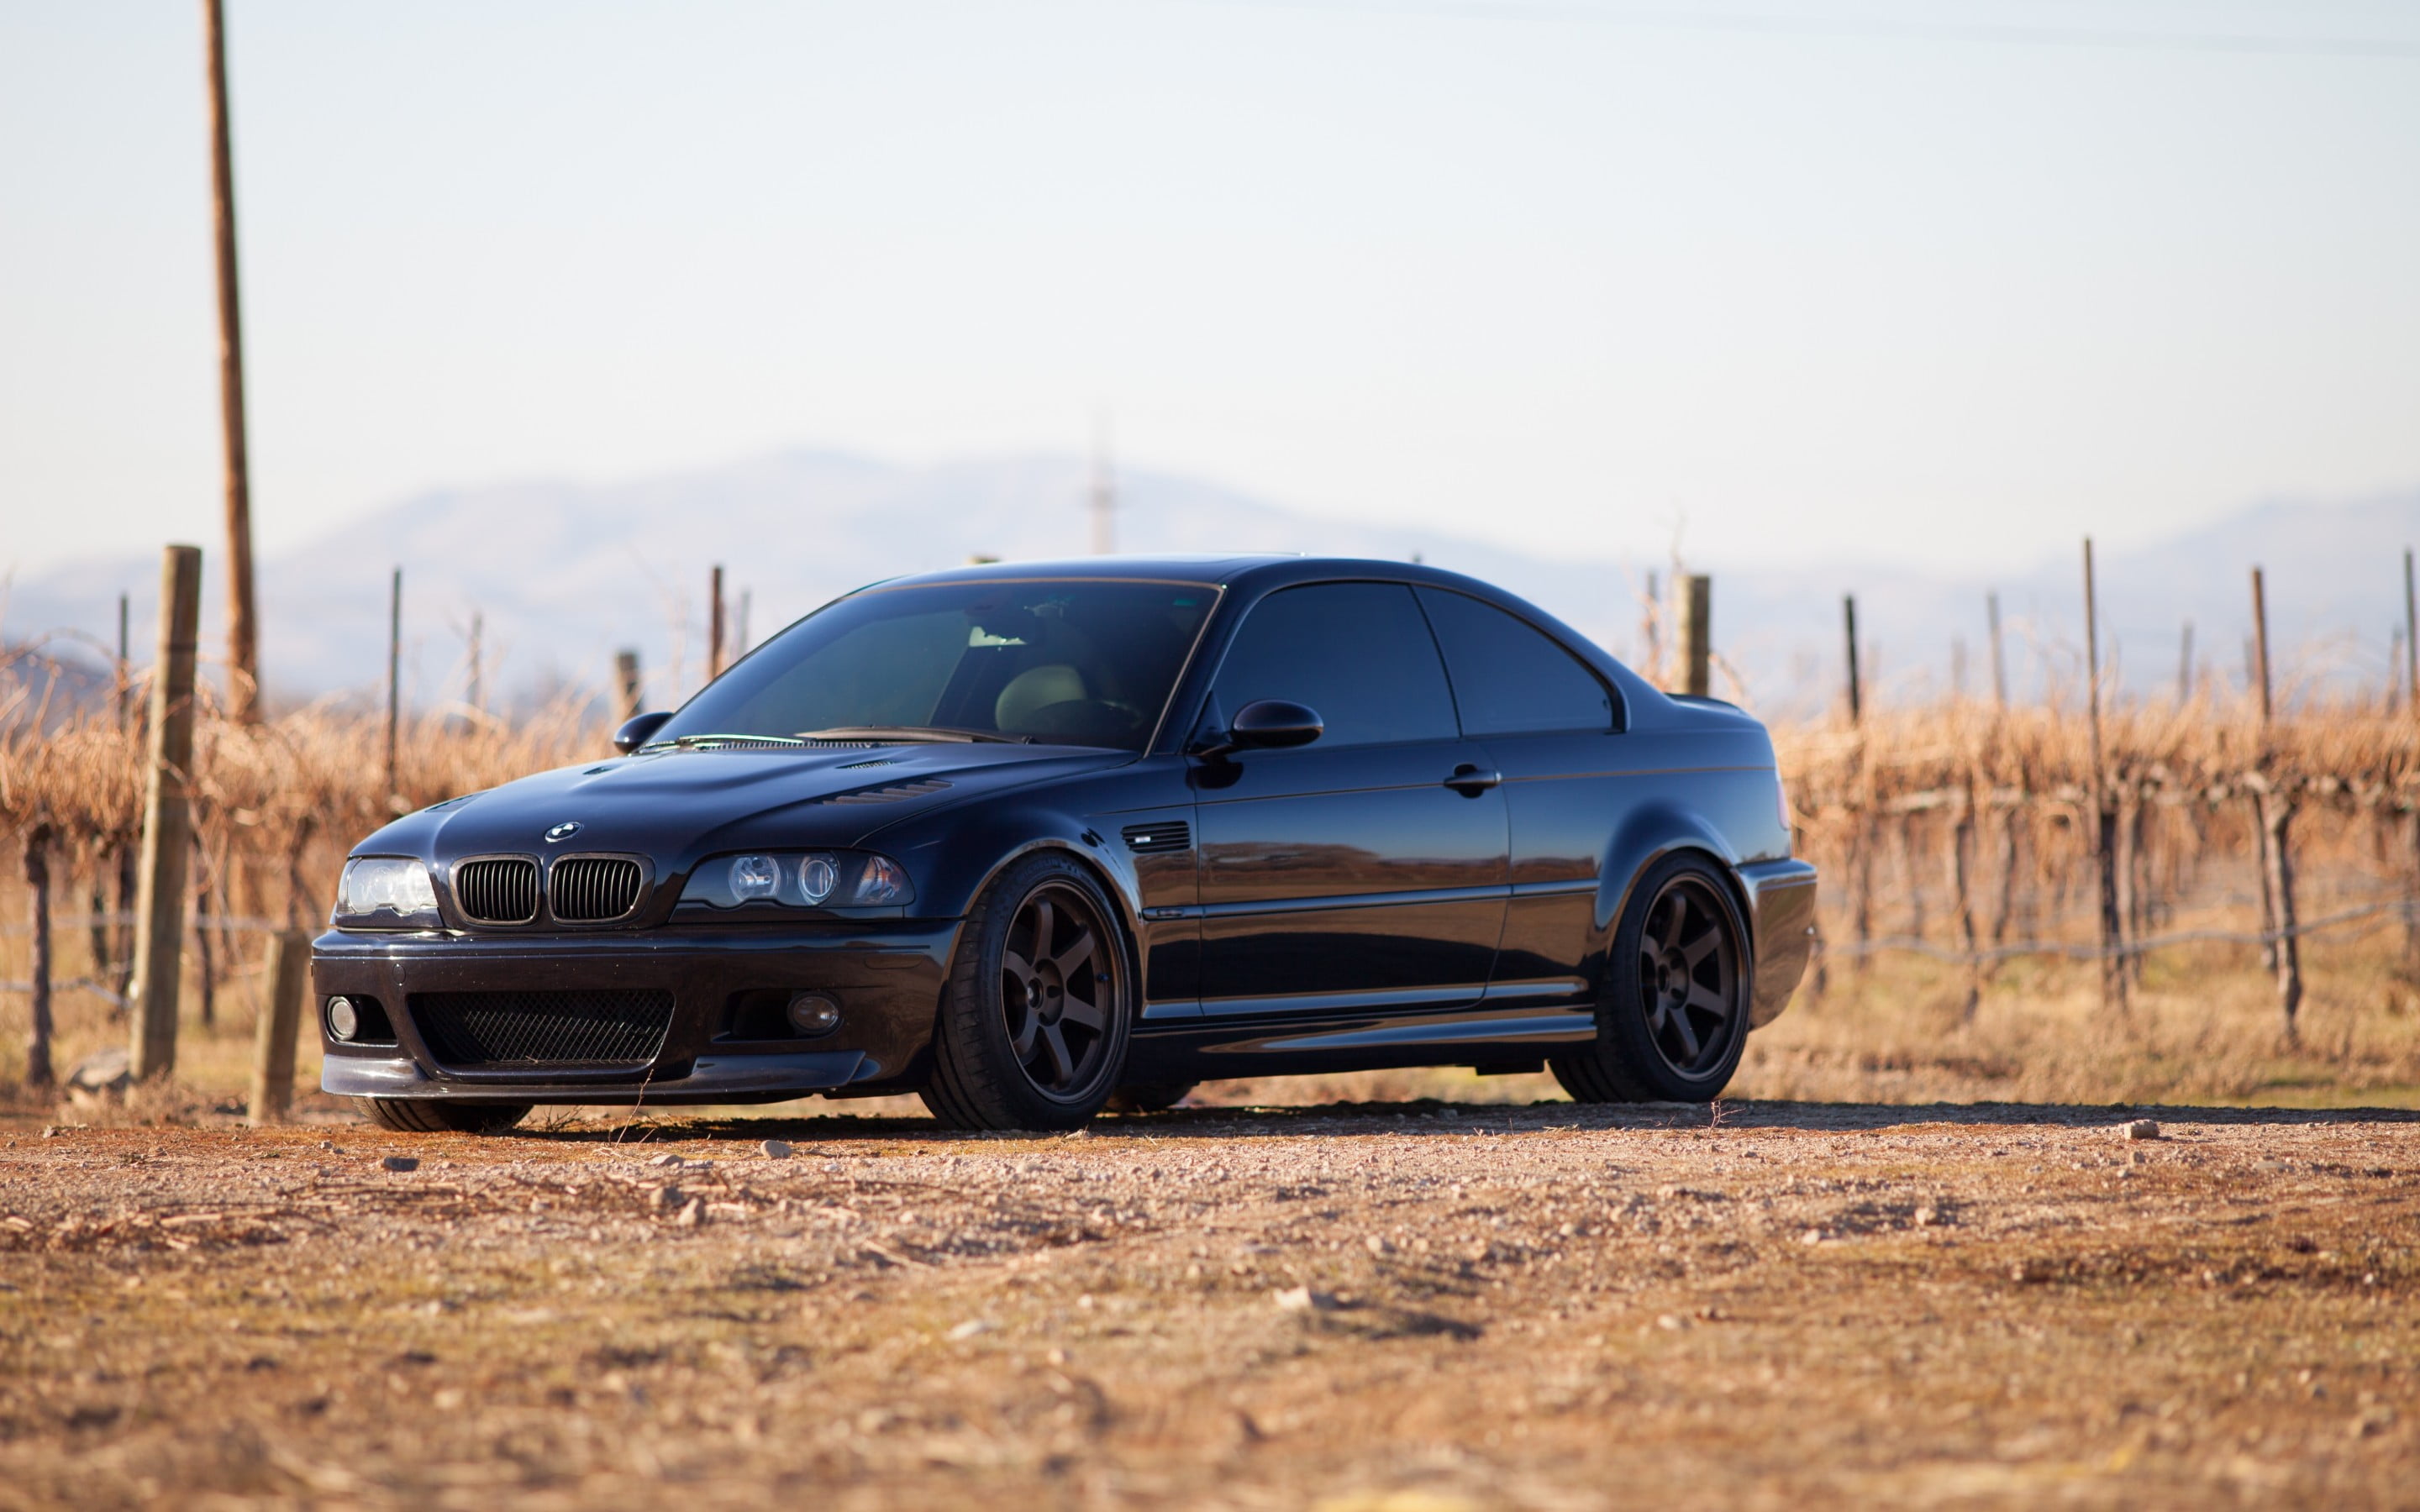 Black BMW E46 parked on dirt road during daytime HD wallpaper ...